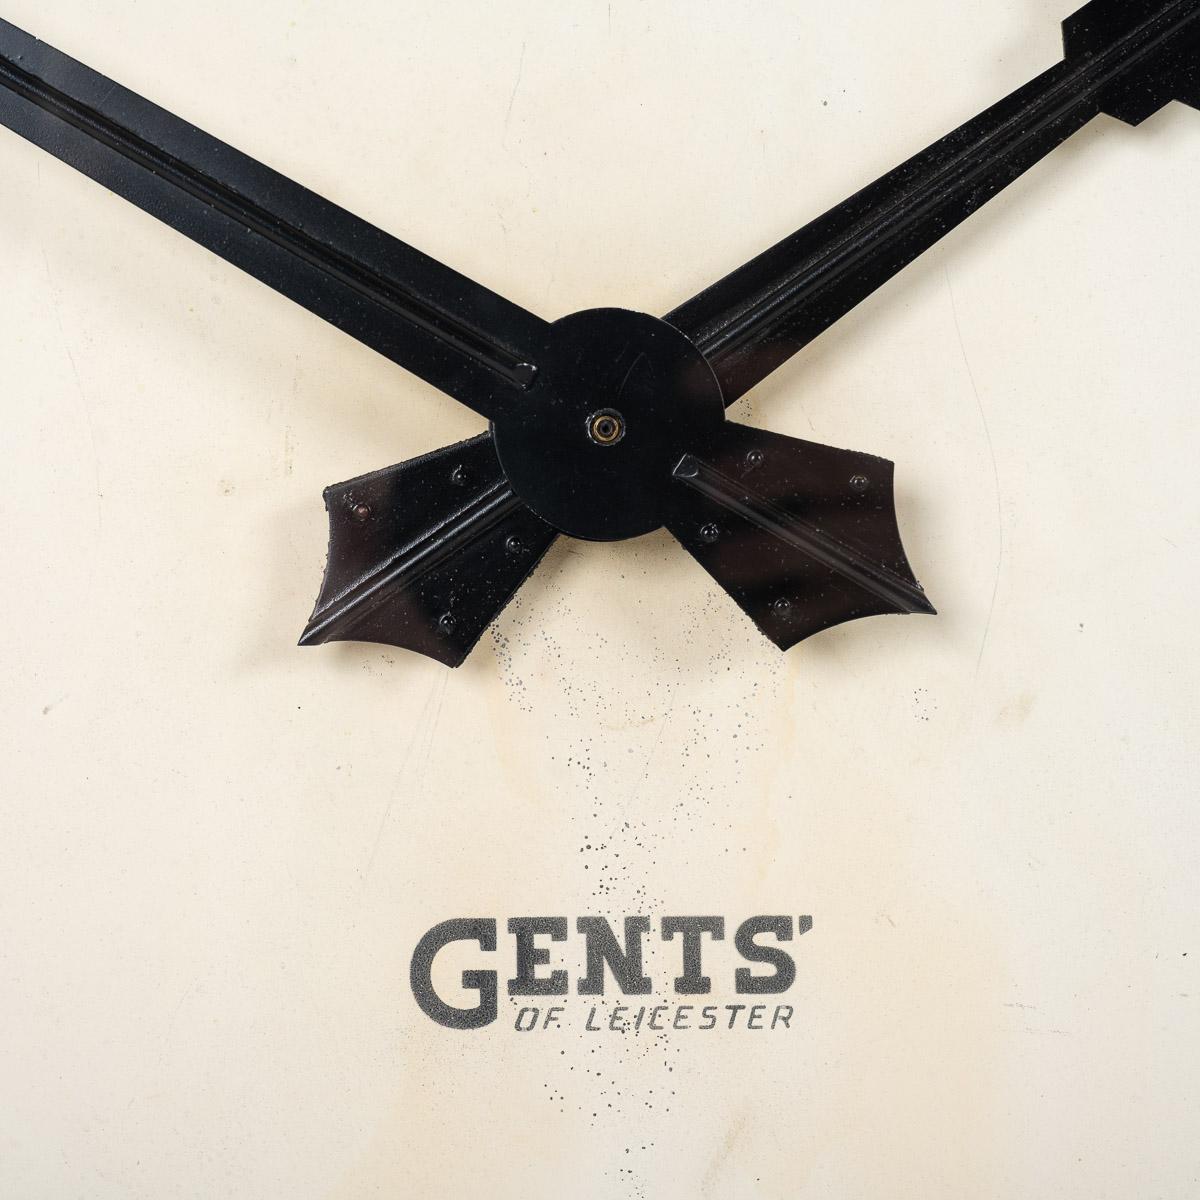 Extra Large Vintage Industrial Metal Wall Clock By Gents Of Leicester 4